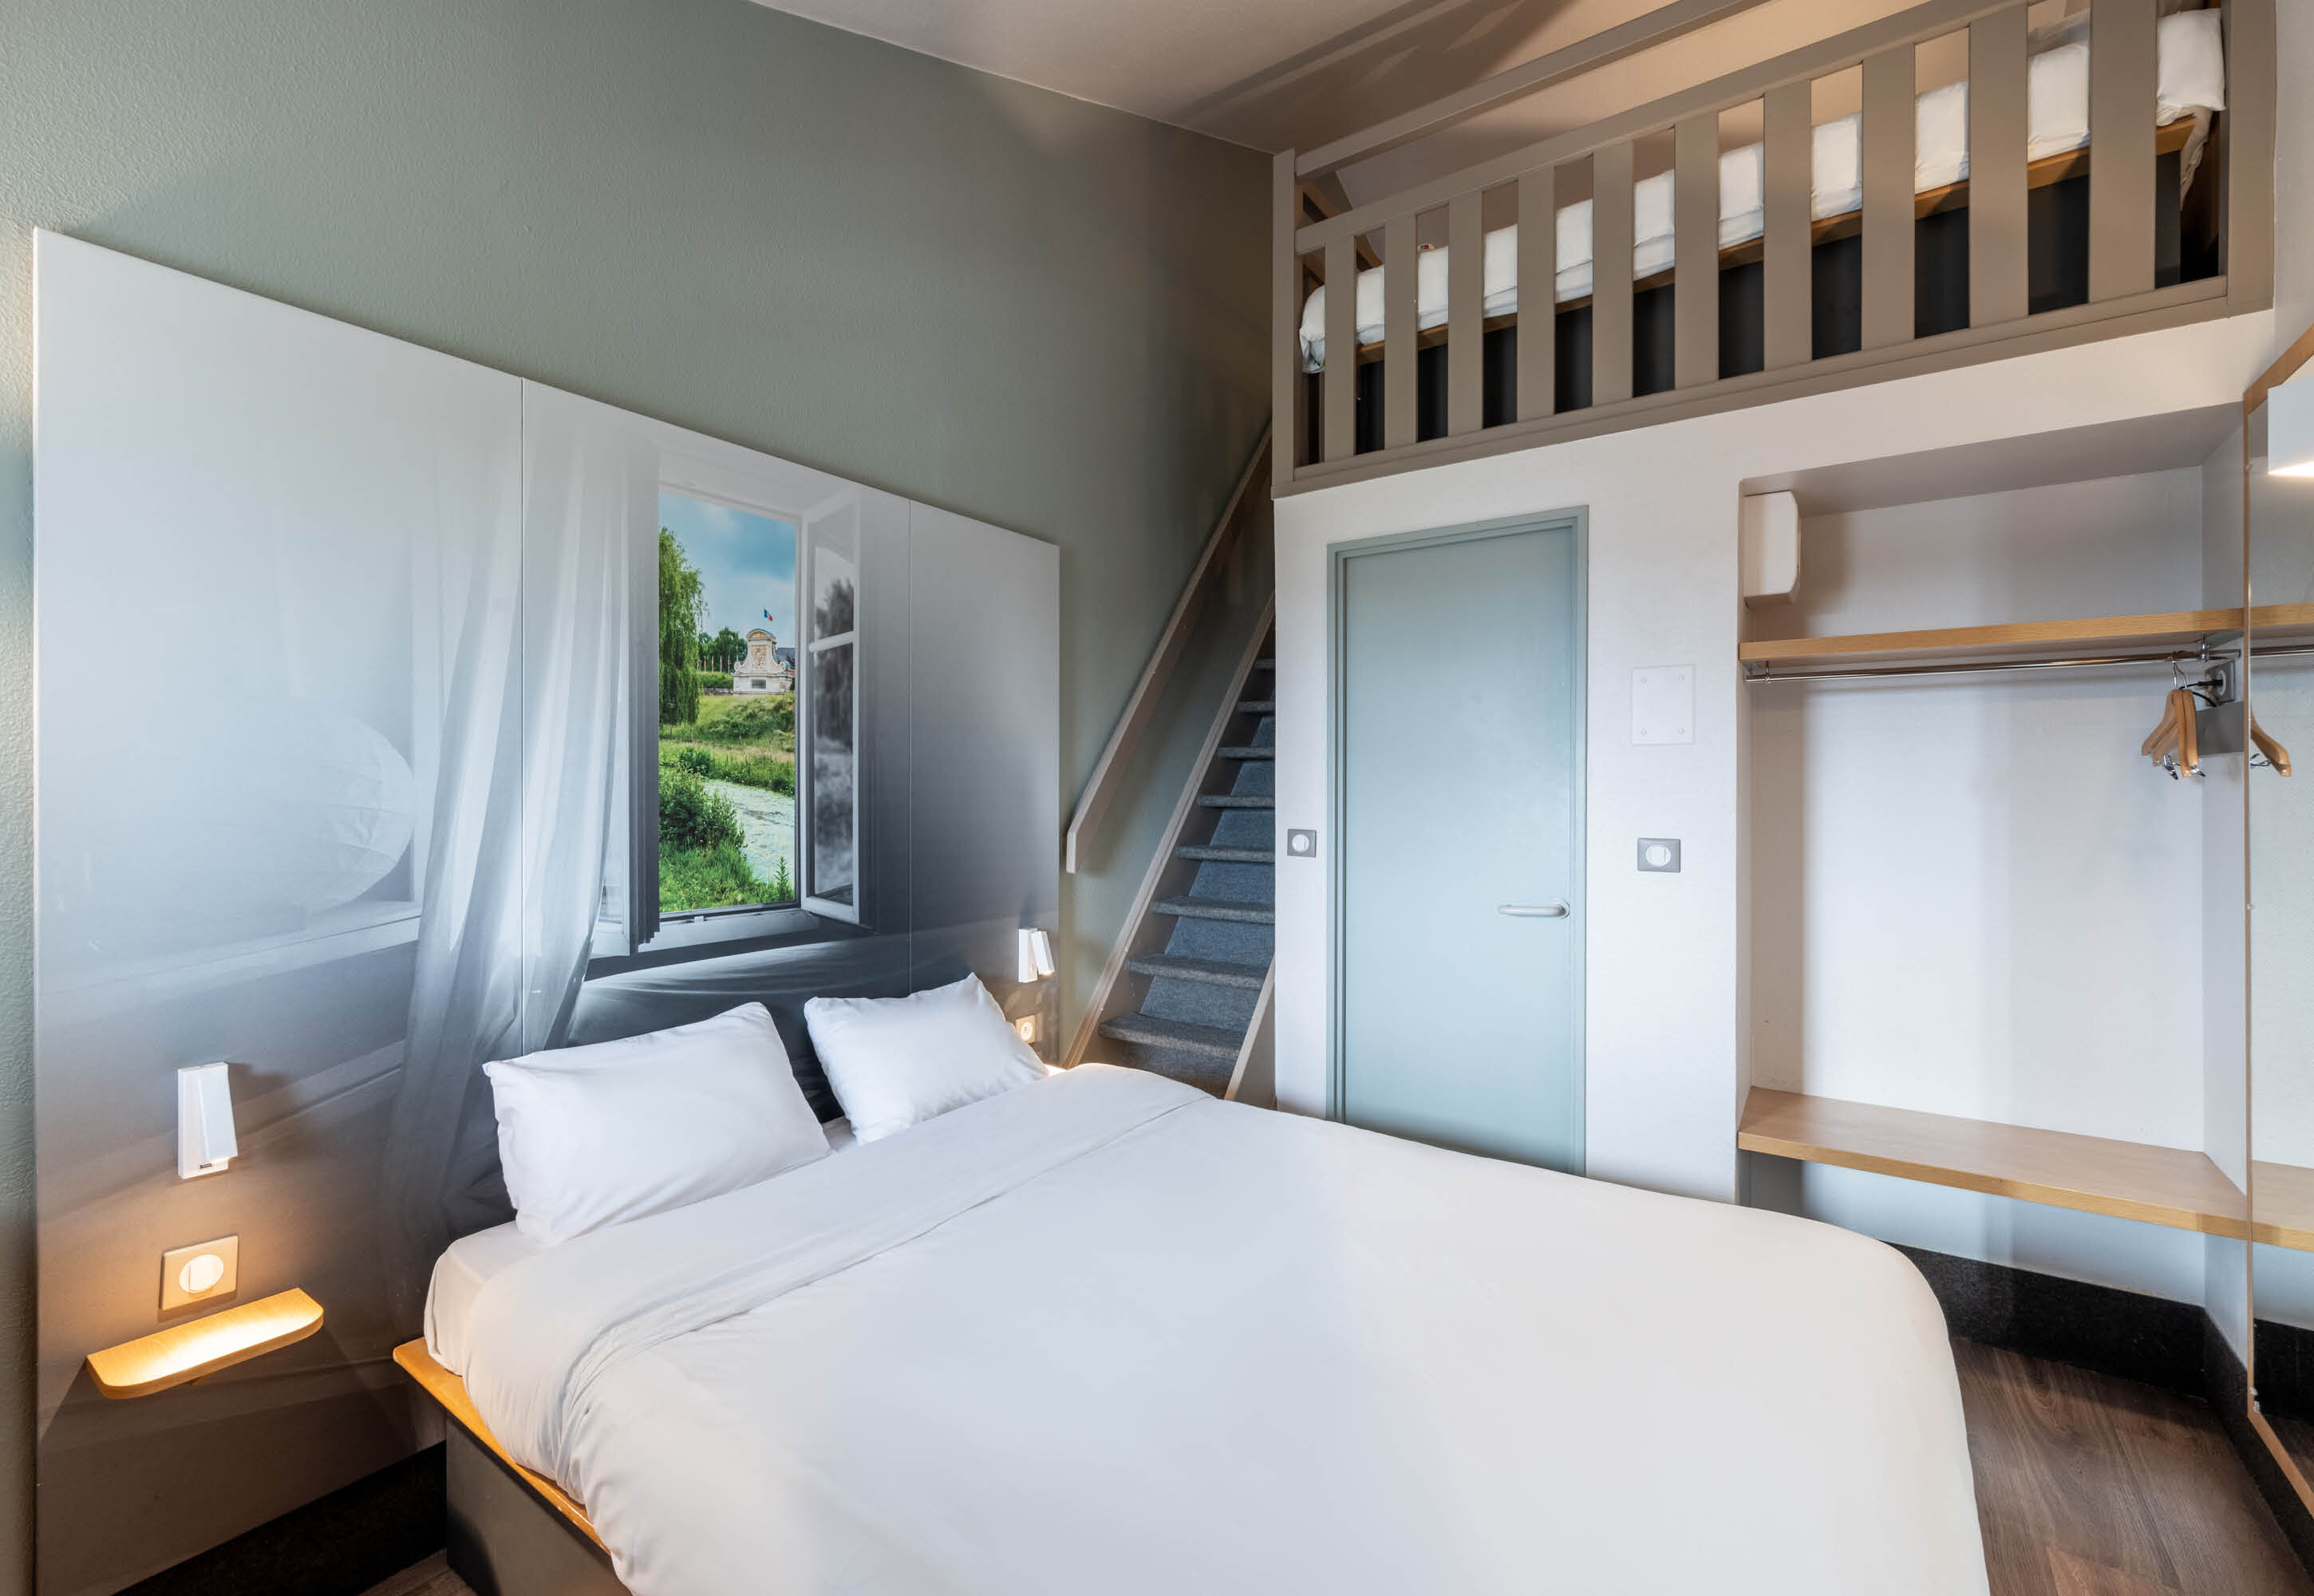 Images B&B HOTEL Lille Seclin Unexpo